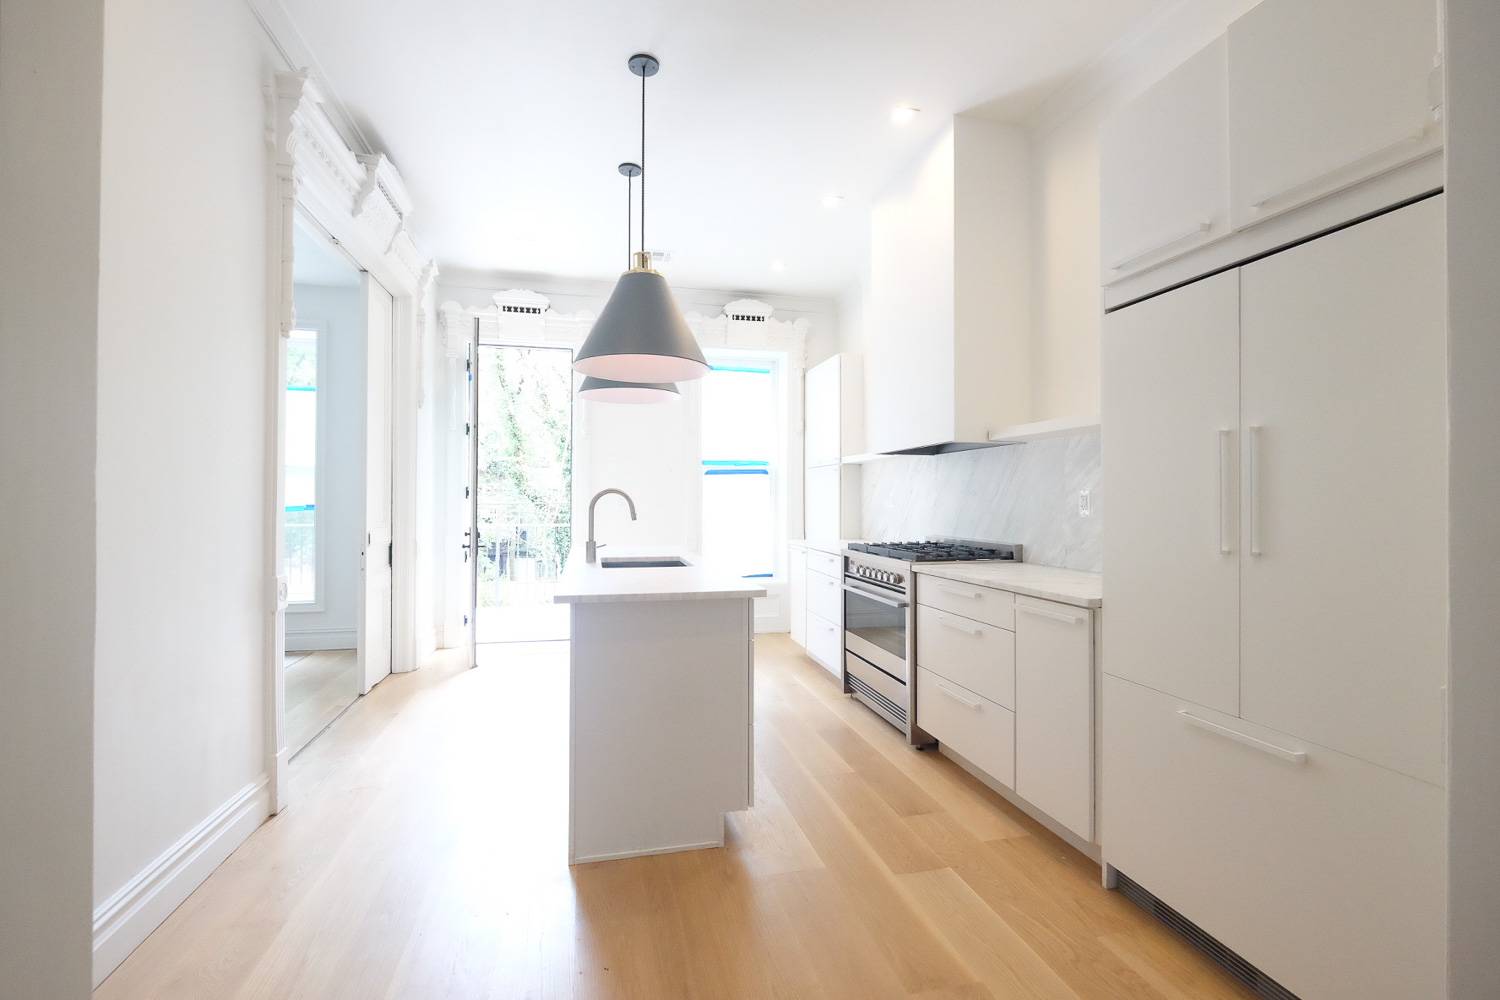 Gorgeous Renovated Brownstone Duplex With Basement and Backyard